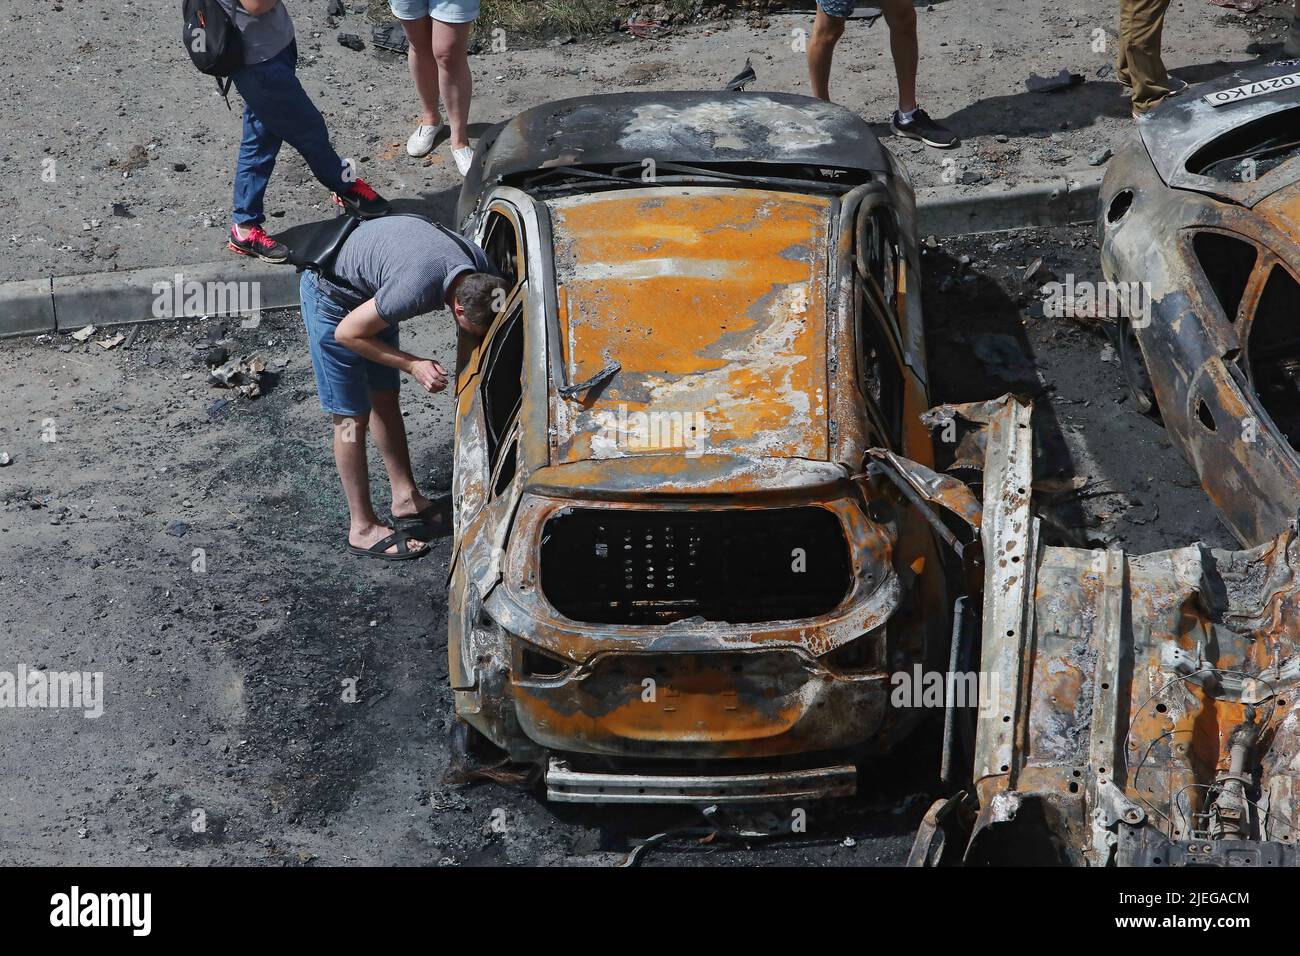 KHARKIV, UKRAINE - JUNE 26, 2022 - A man looks inside a burnt-out car in the yard of an apartment block after the Russian troops shelled a northern ne Stock Photo